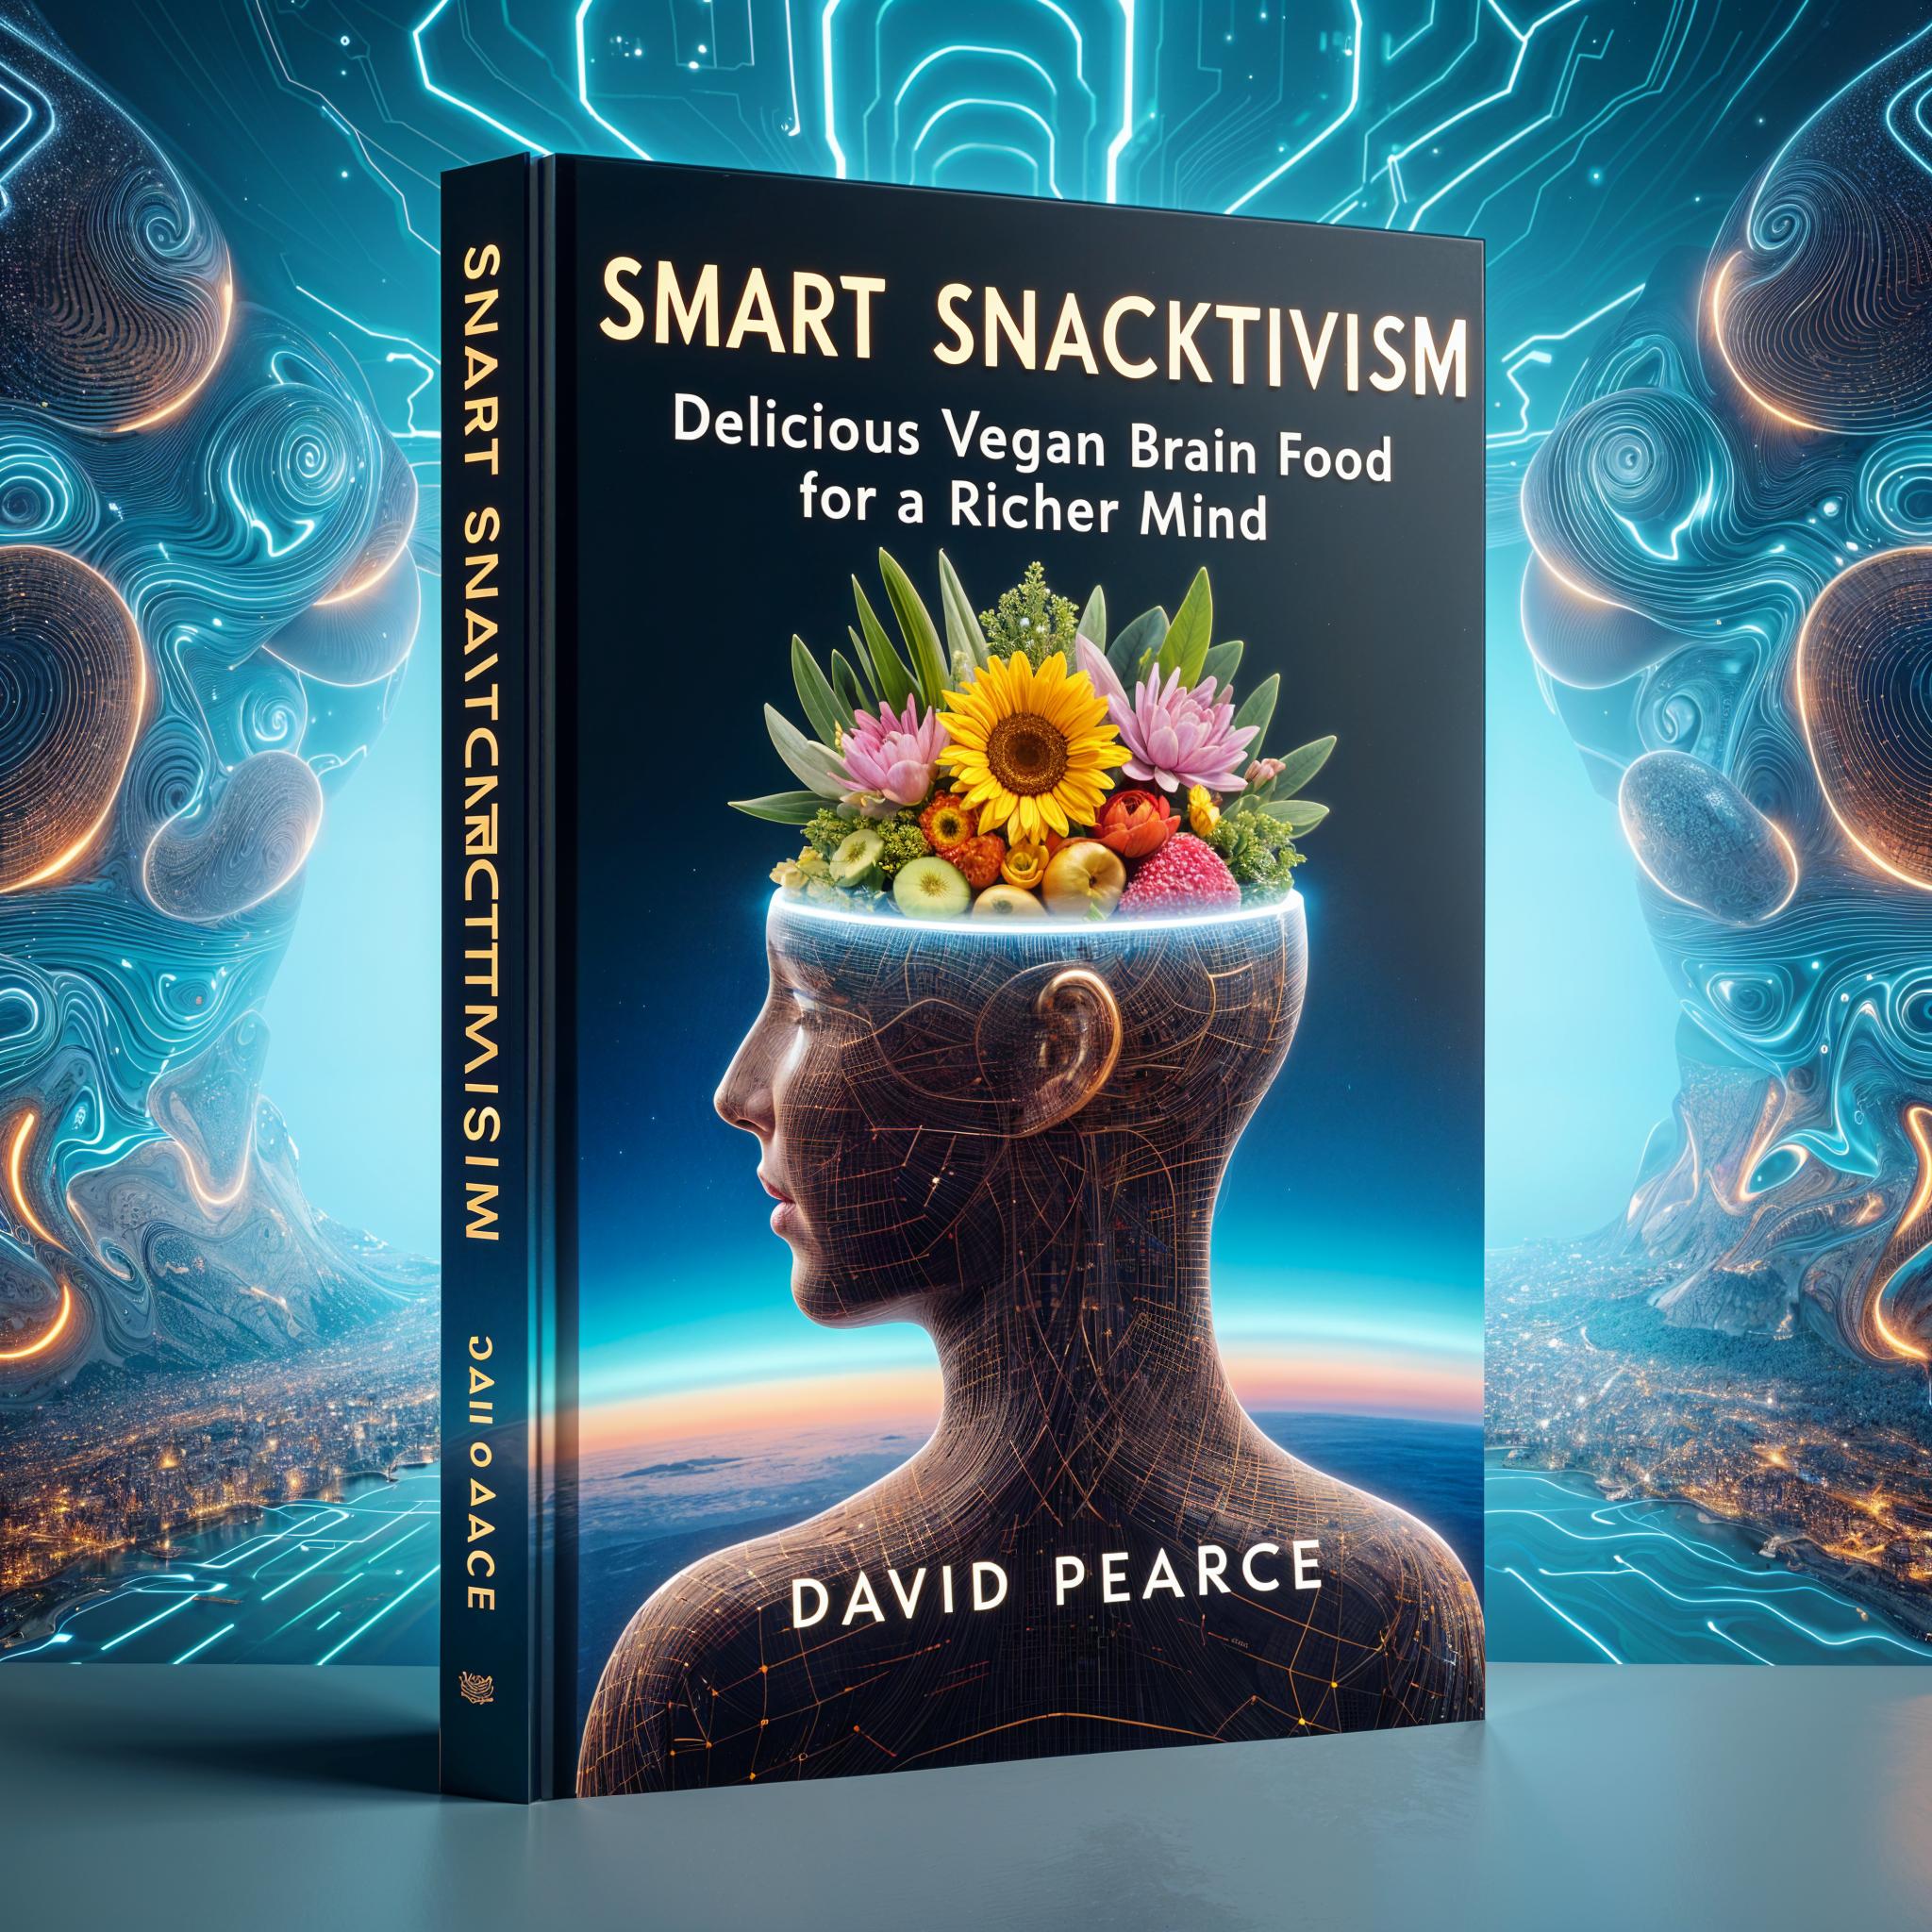 Smart Snactivism:  Delicious Vegan Brain Food for a Richer Mind by David Pearce